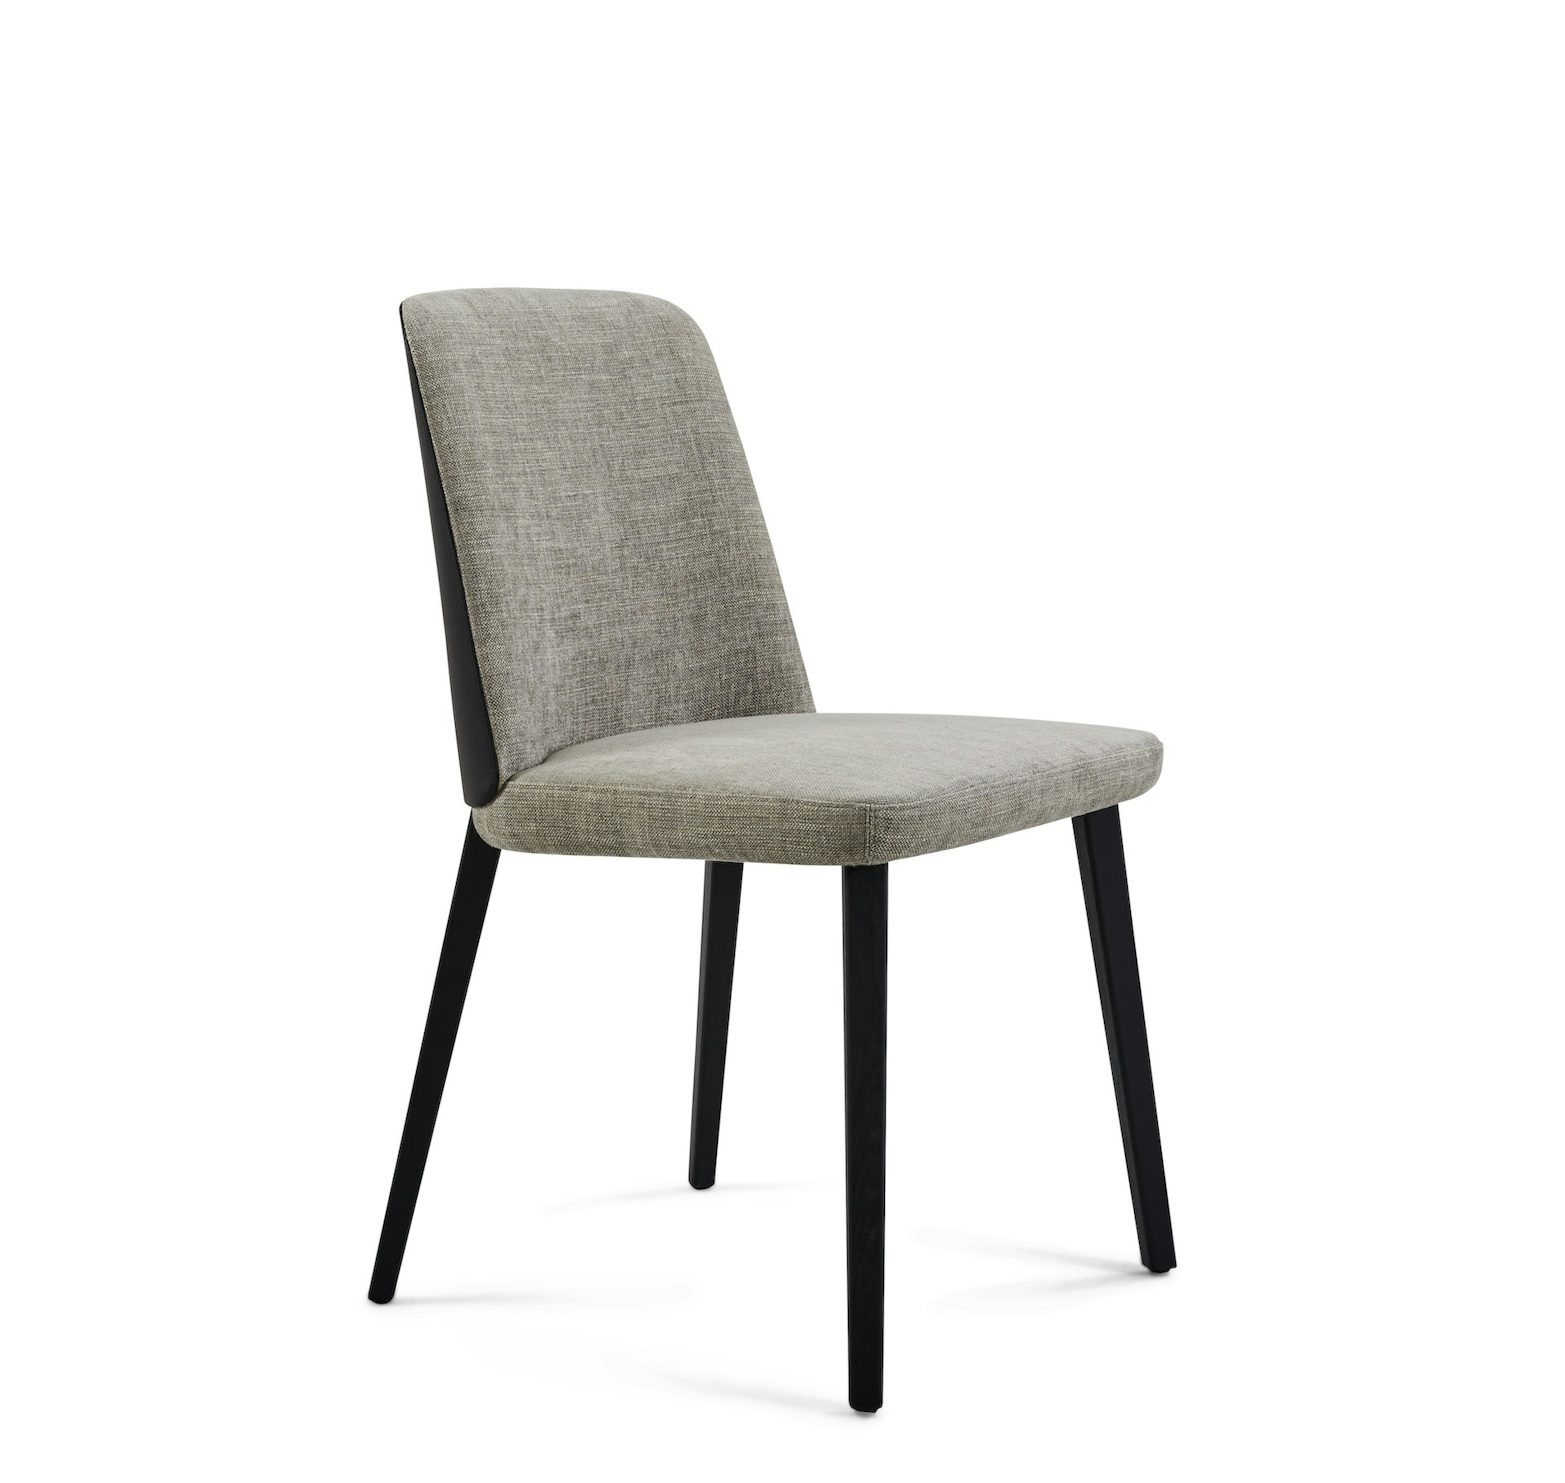 Back Me Up Side Chair Arian Brekveld 21